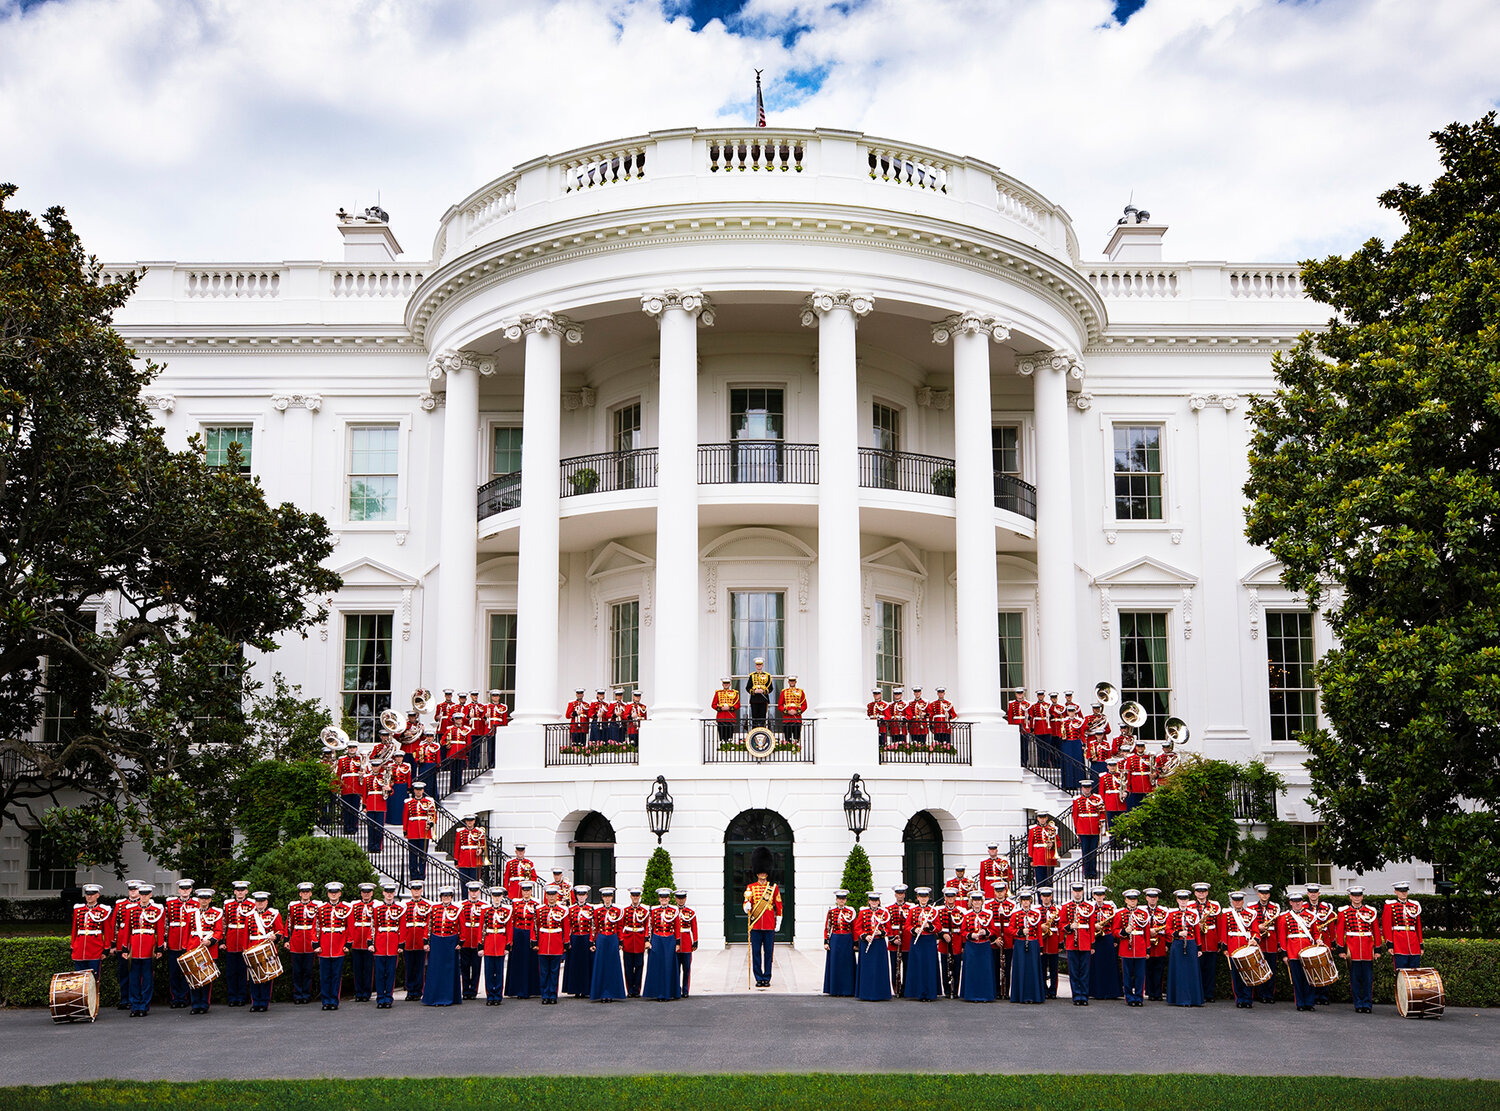 The U.S. Marine Band that is known as the "President's Own" will give a free performance at the Wharton Center on Oct. 25.